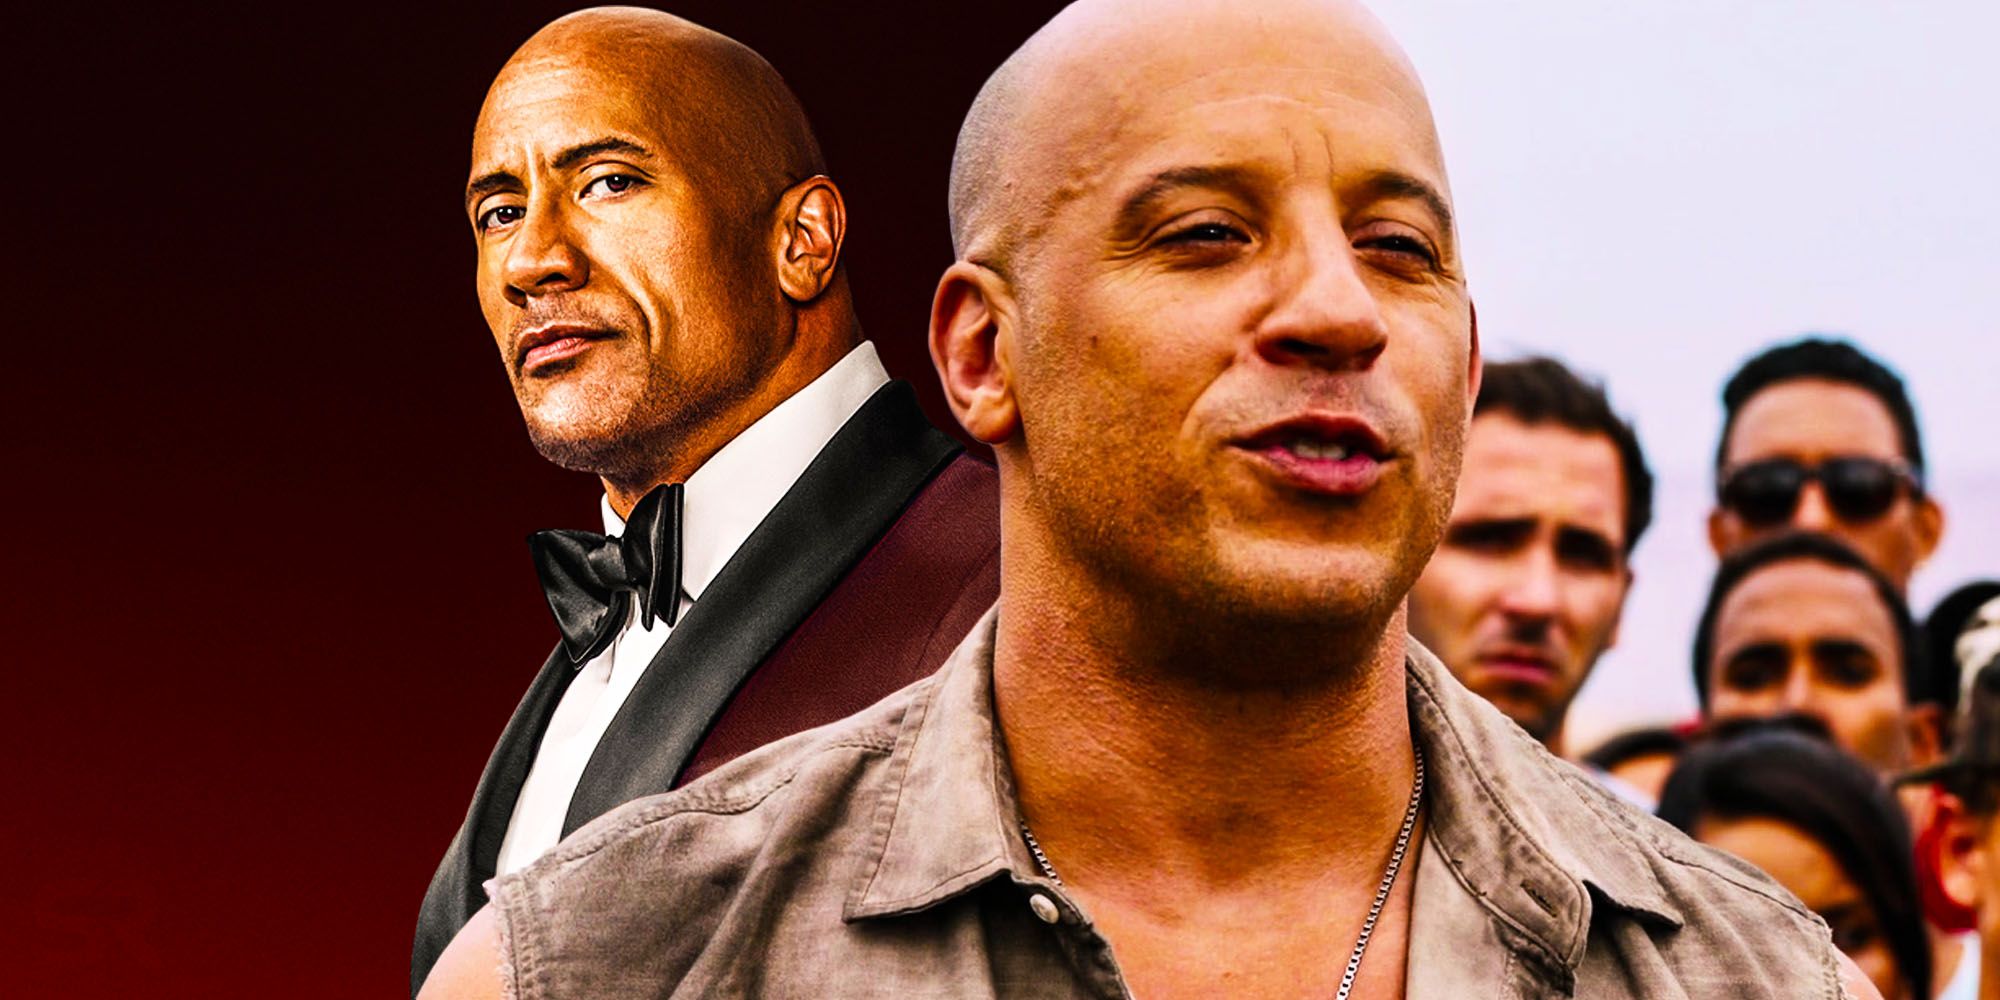 How Red Notice Continues The Rock & Vin Diesel's Feud